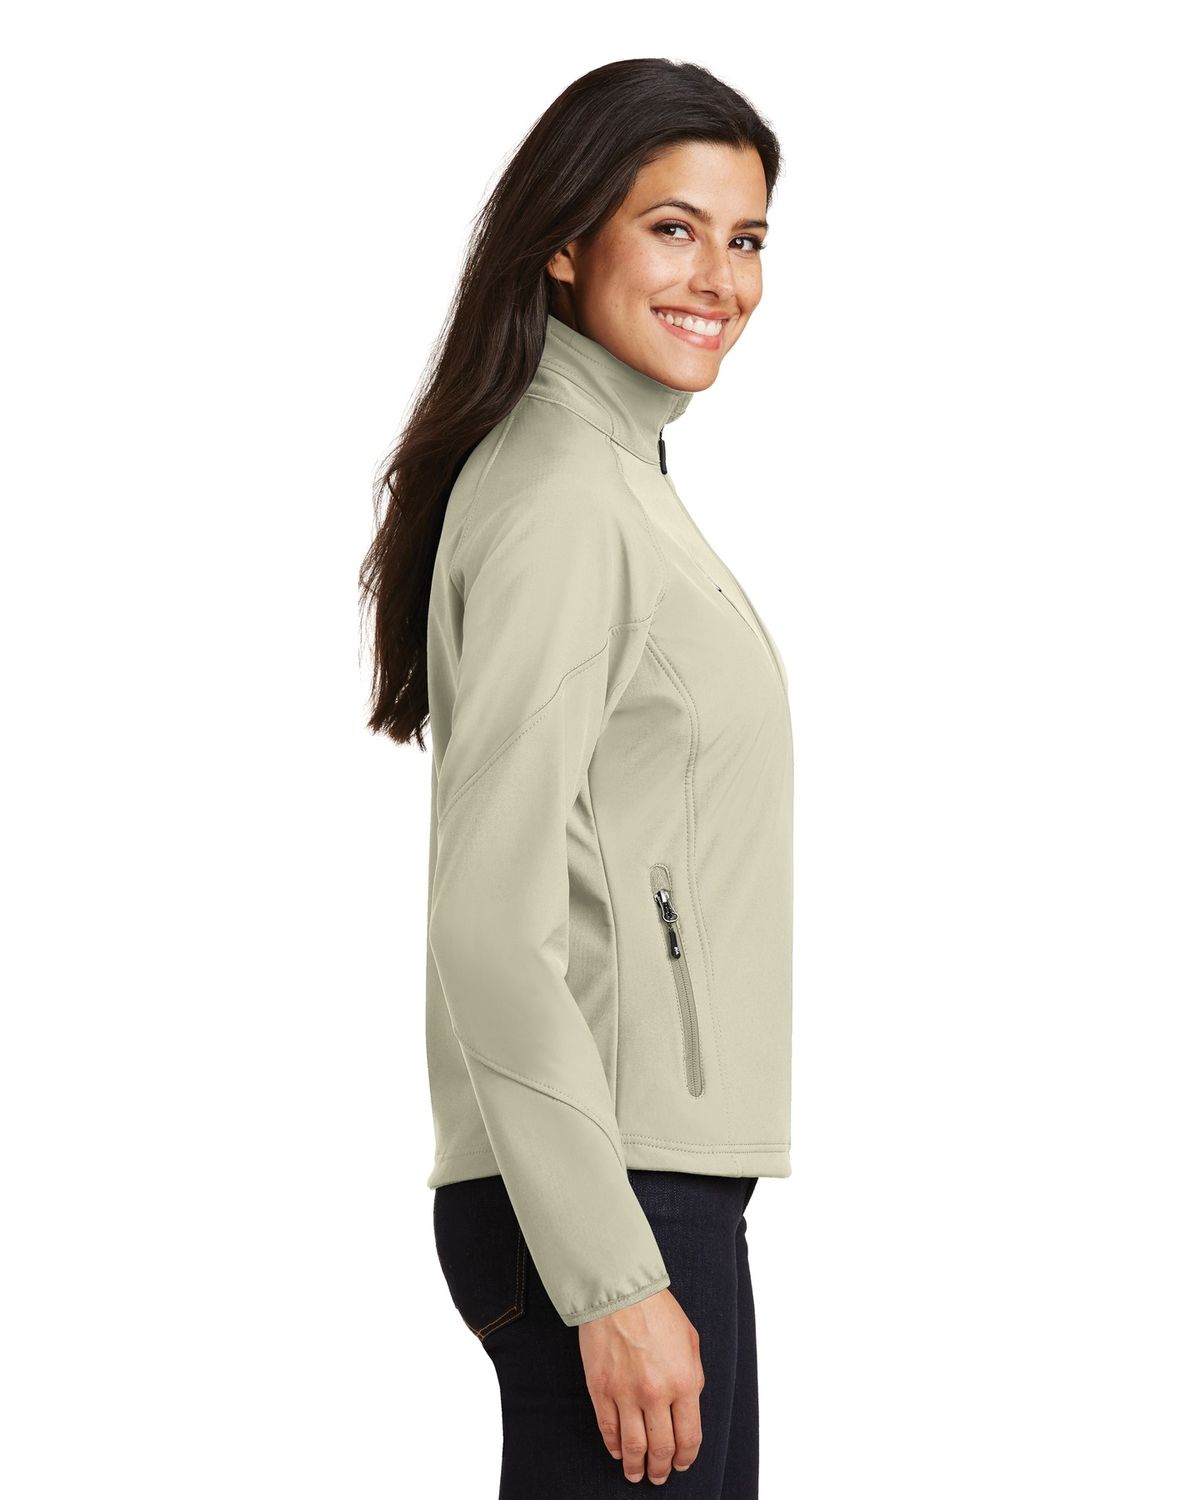 'Port Authority L705 Ladies Textured Soft Shell Jacket'